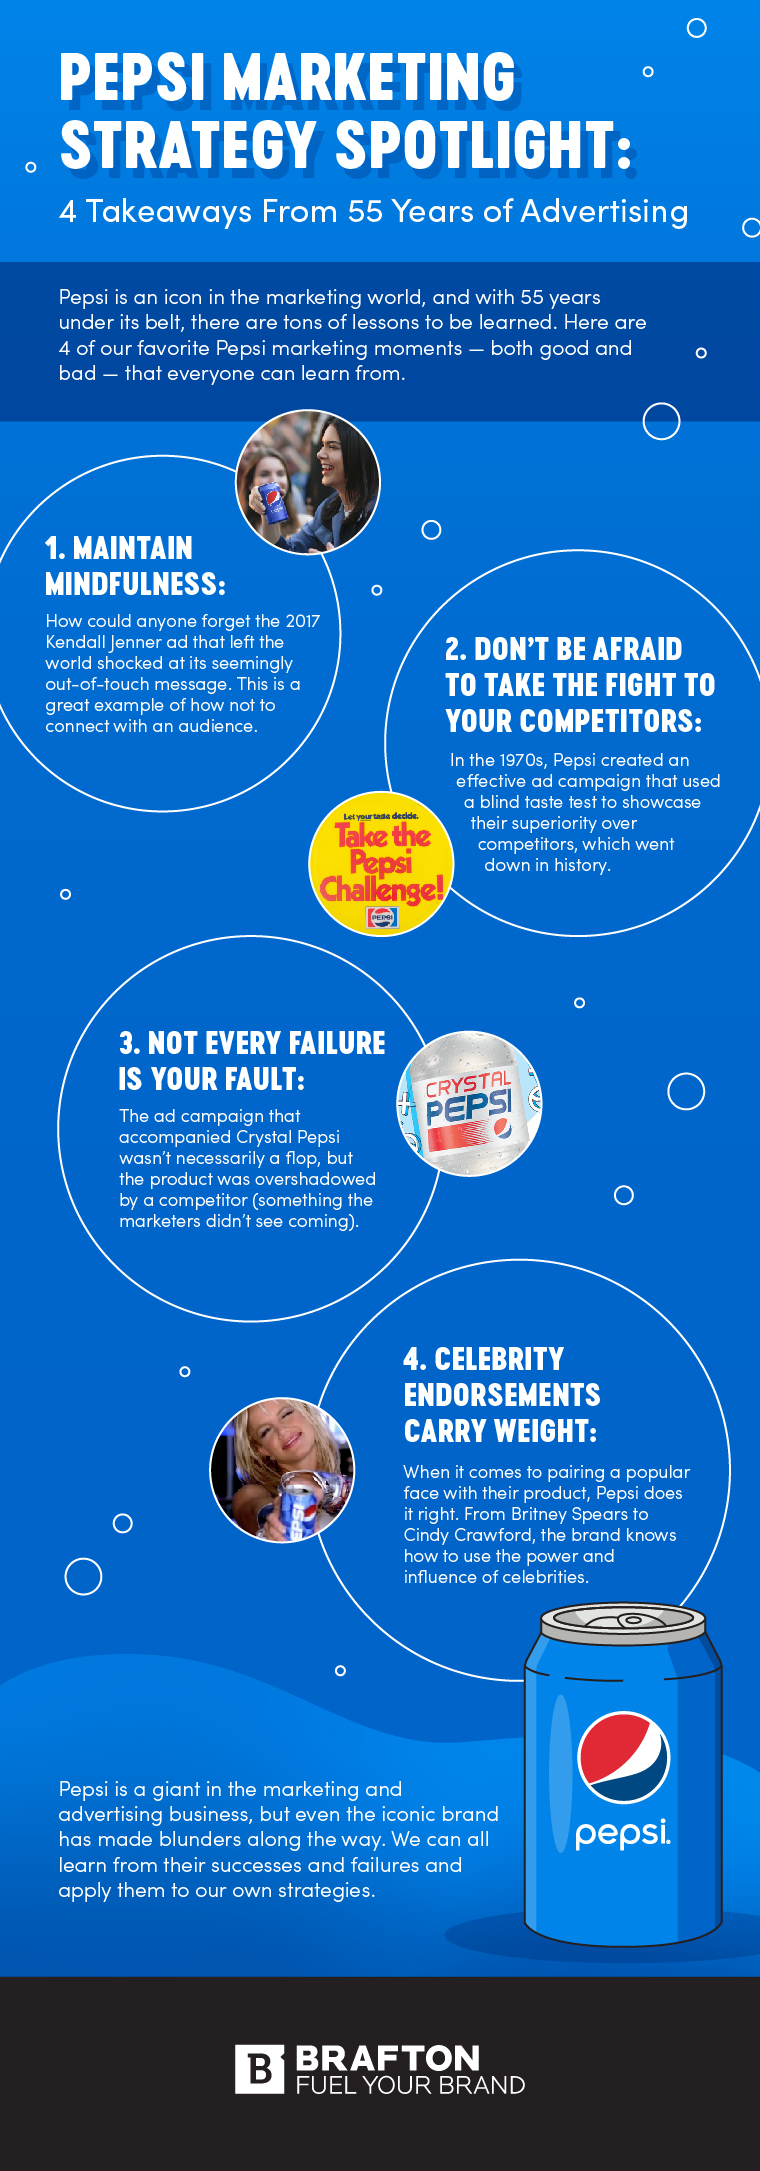 Pepsi Marketing Strategy Spotlight: 4 lessons from 55 years of ad campaigns